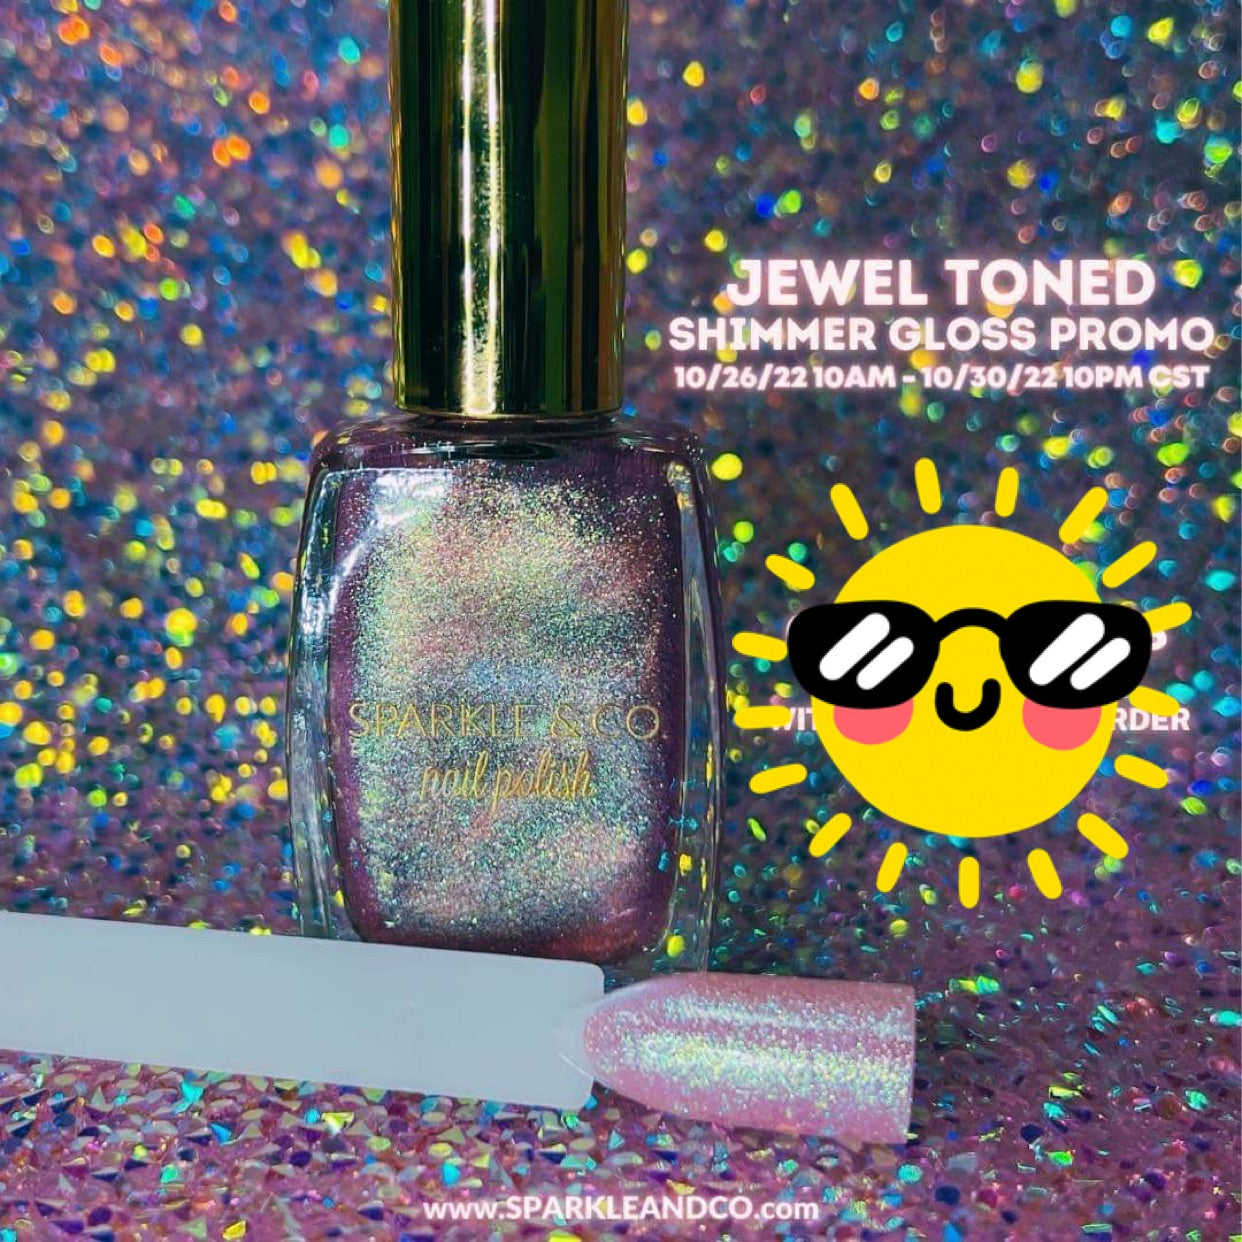 Jewel Toned Shimmer Gloss Collection by Sparkle & Co